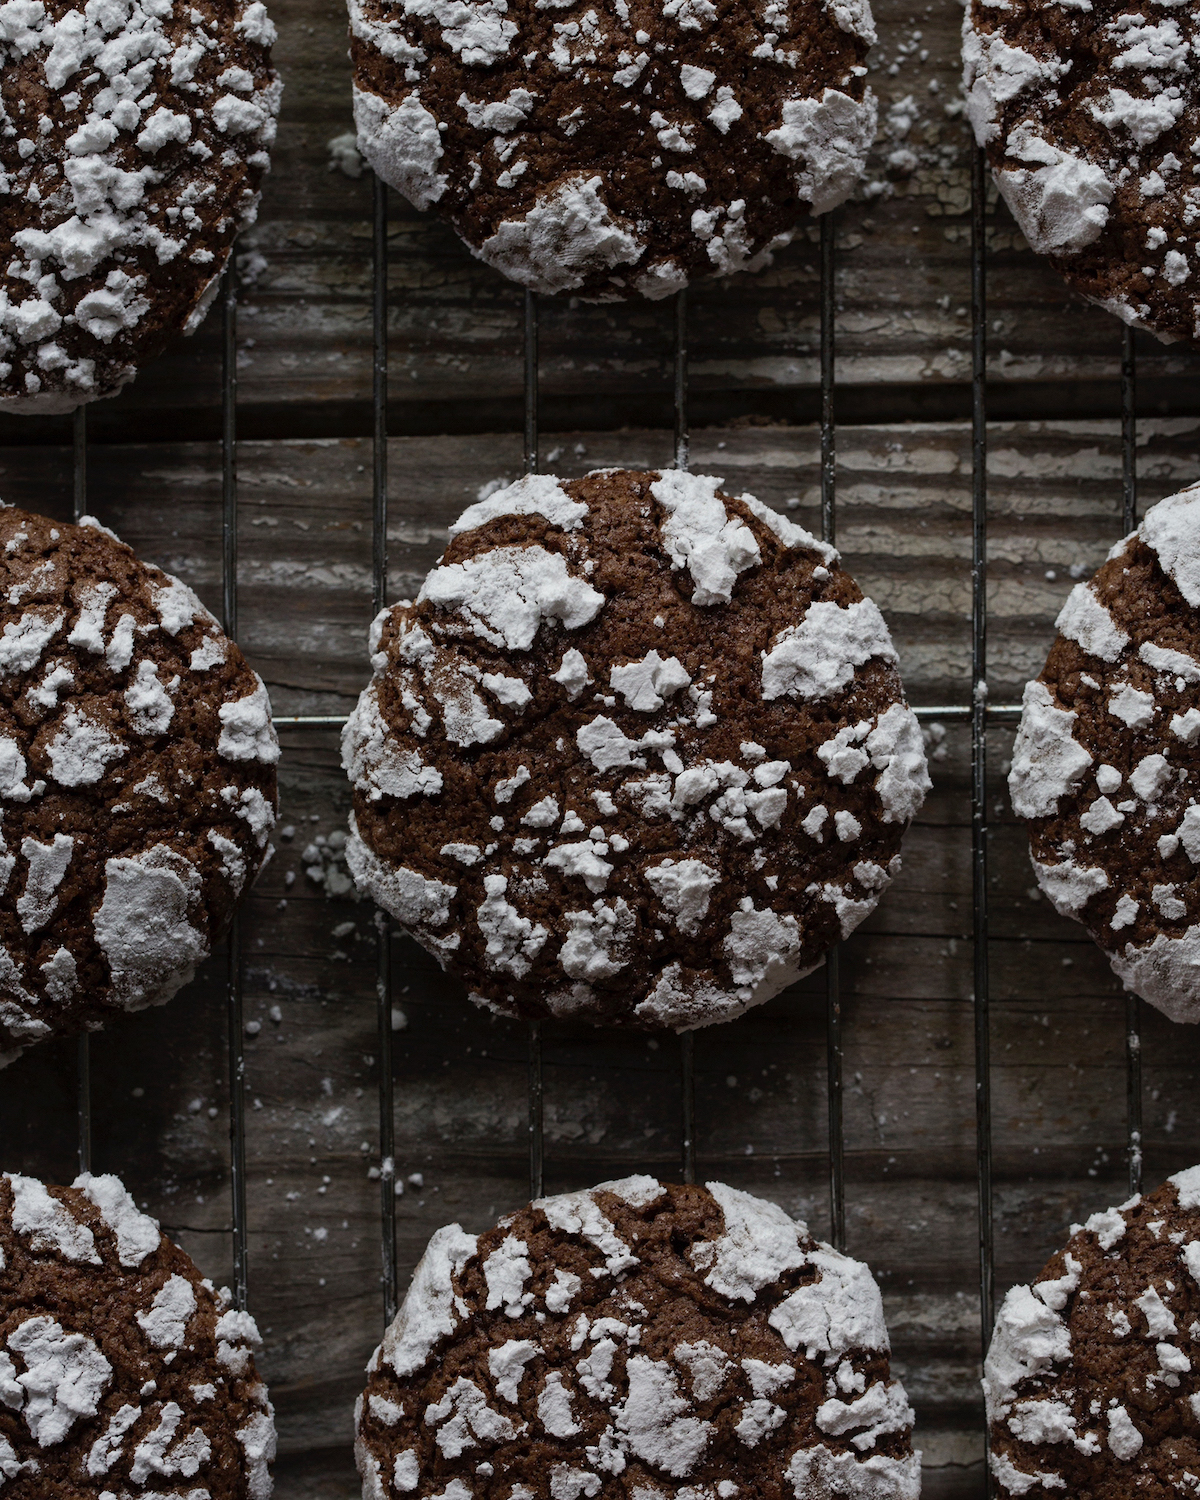 Mexican Chocolate Cookies - 6 bags